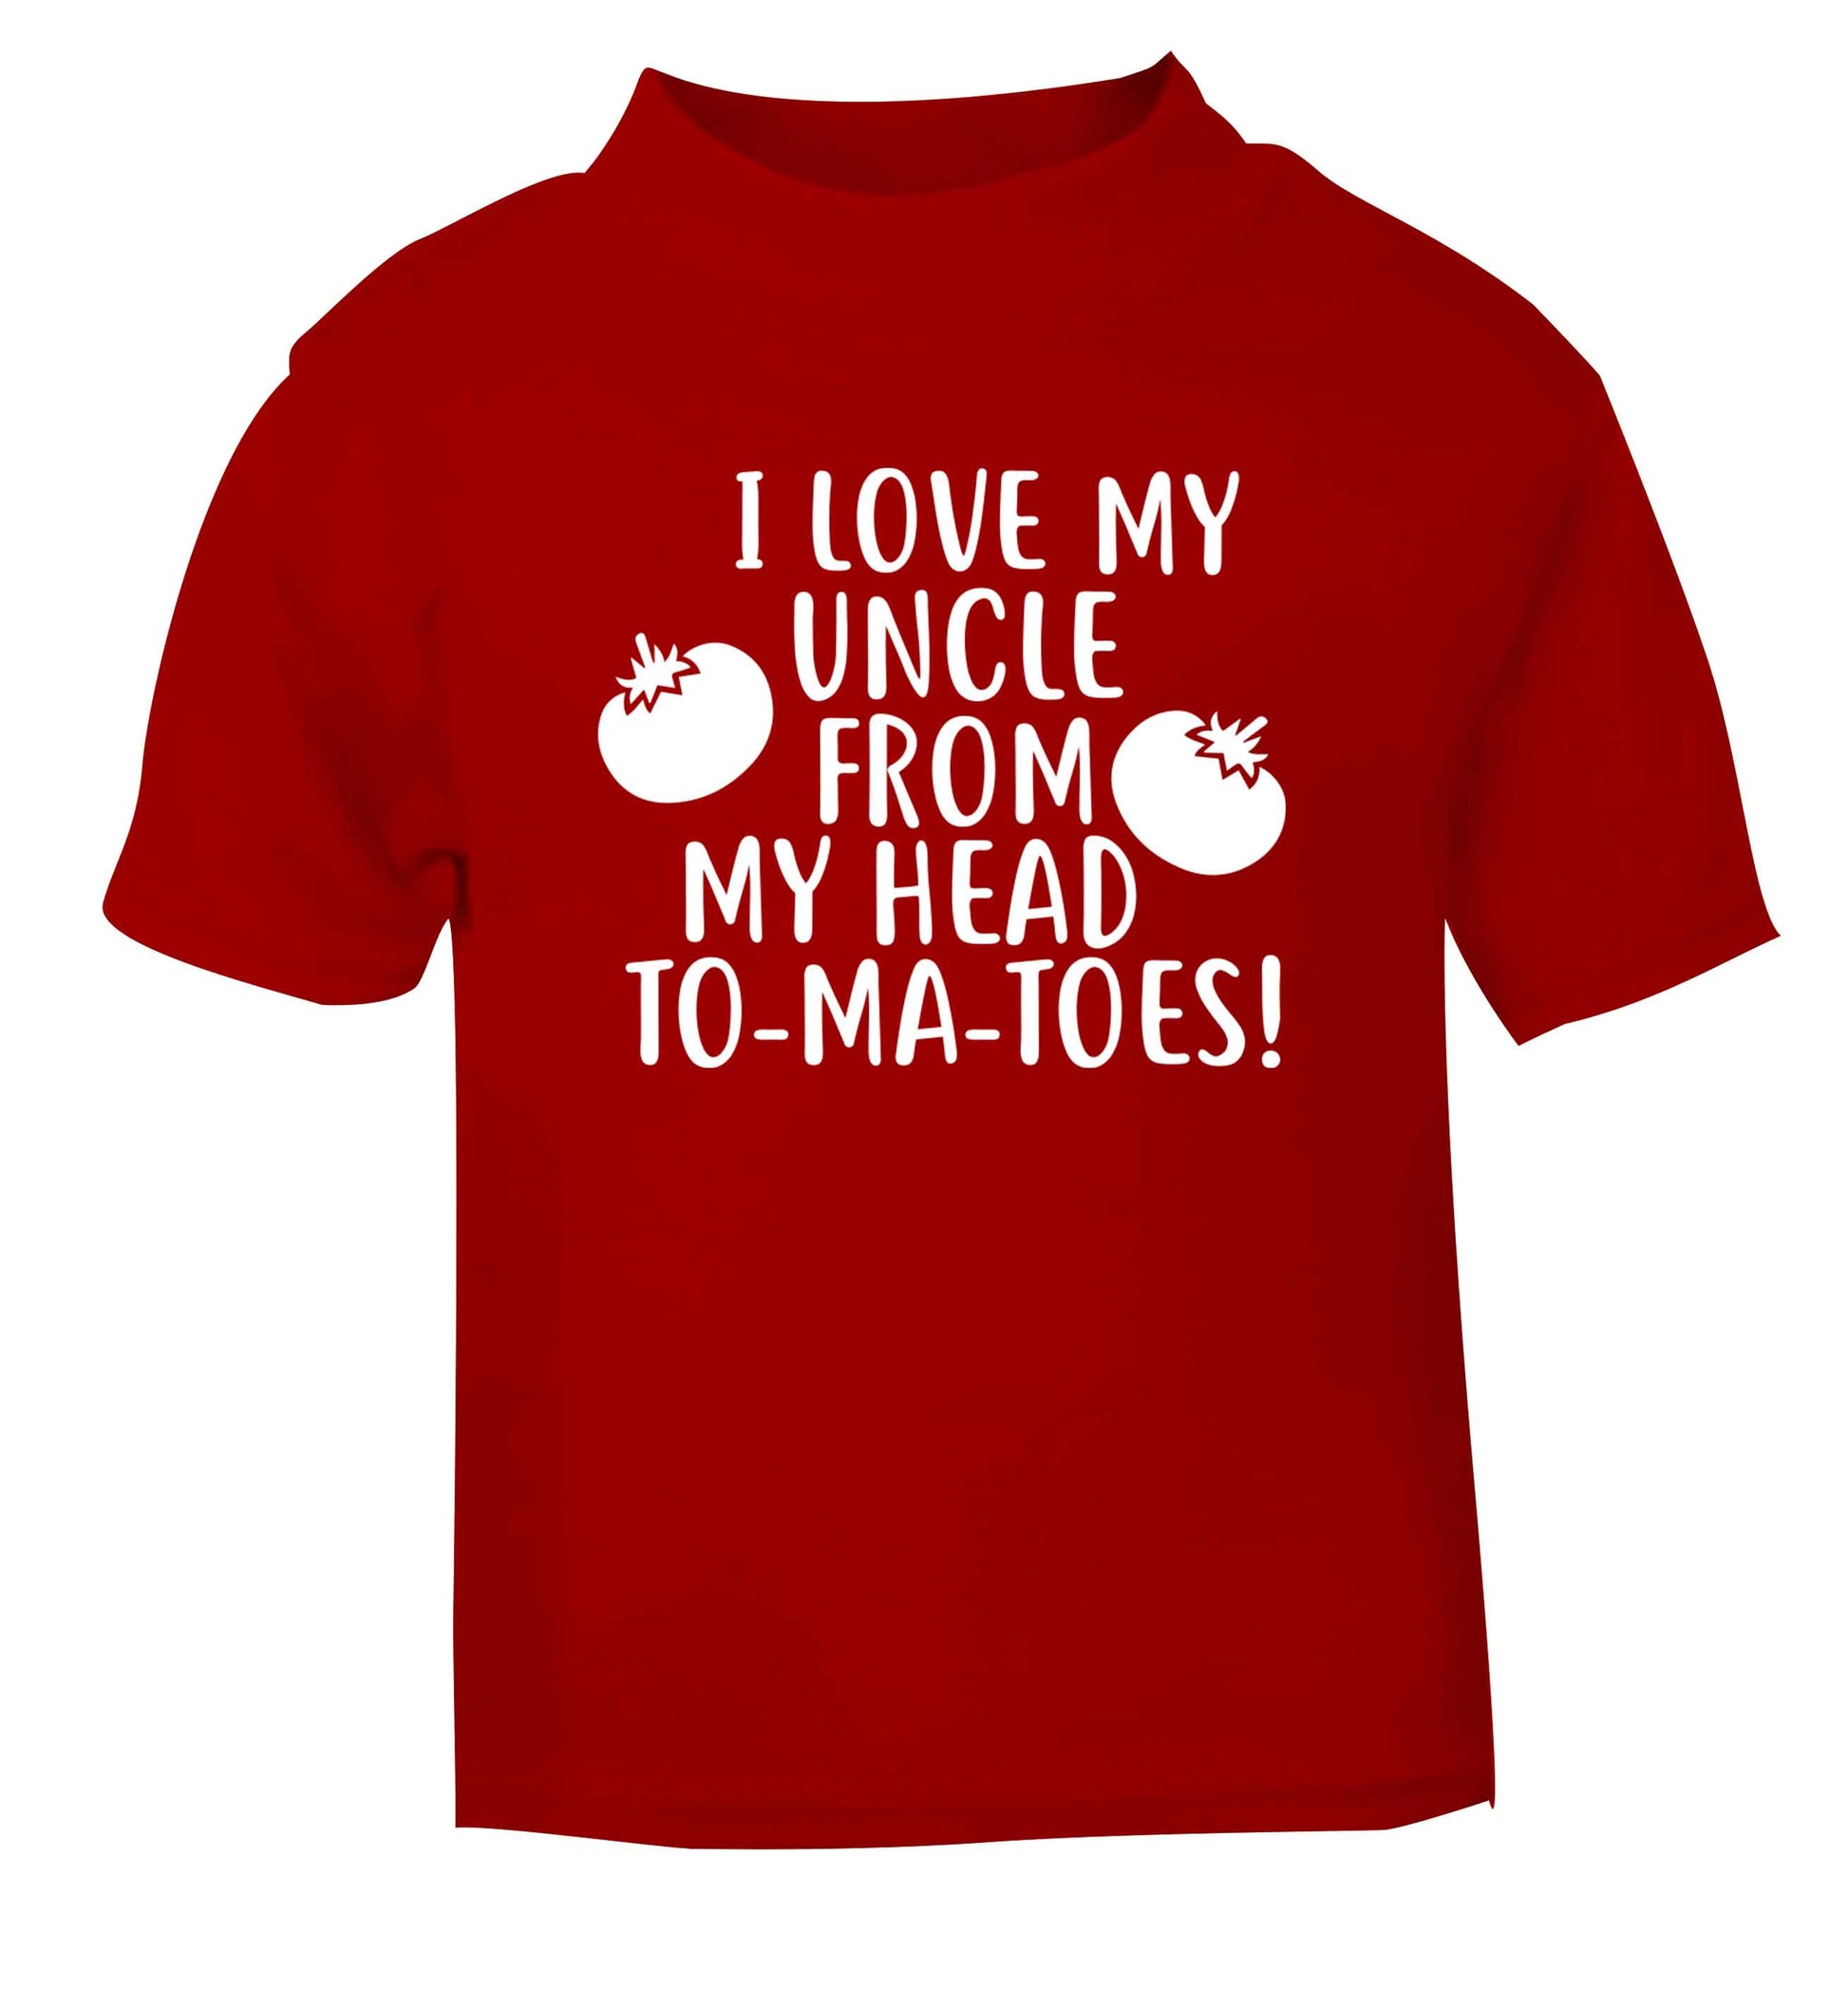 I love my uncle from my head To-Ma-Toes red Baby Toddler Tshirt 2 Years